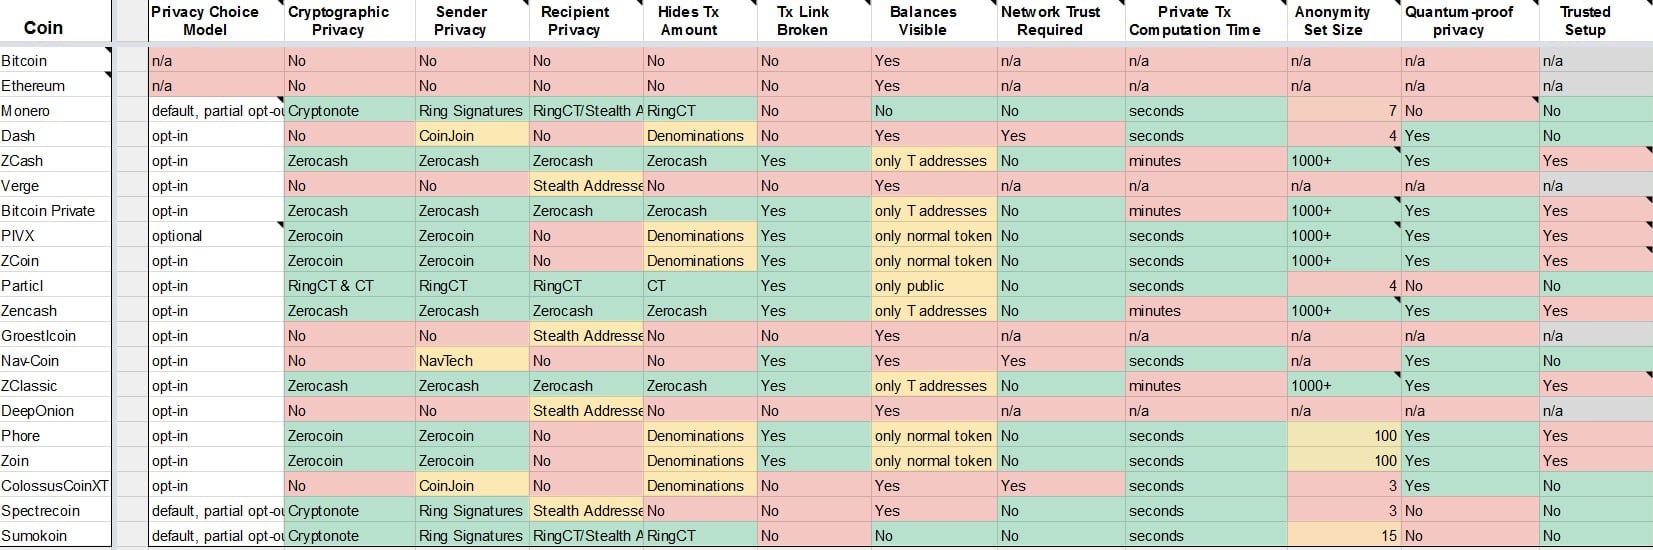 Privacy Cryptocurrency Matrix Spreadsheet Compares Top Privacy Projects - 1